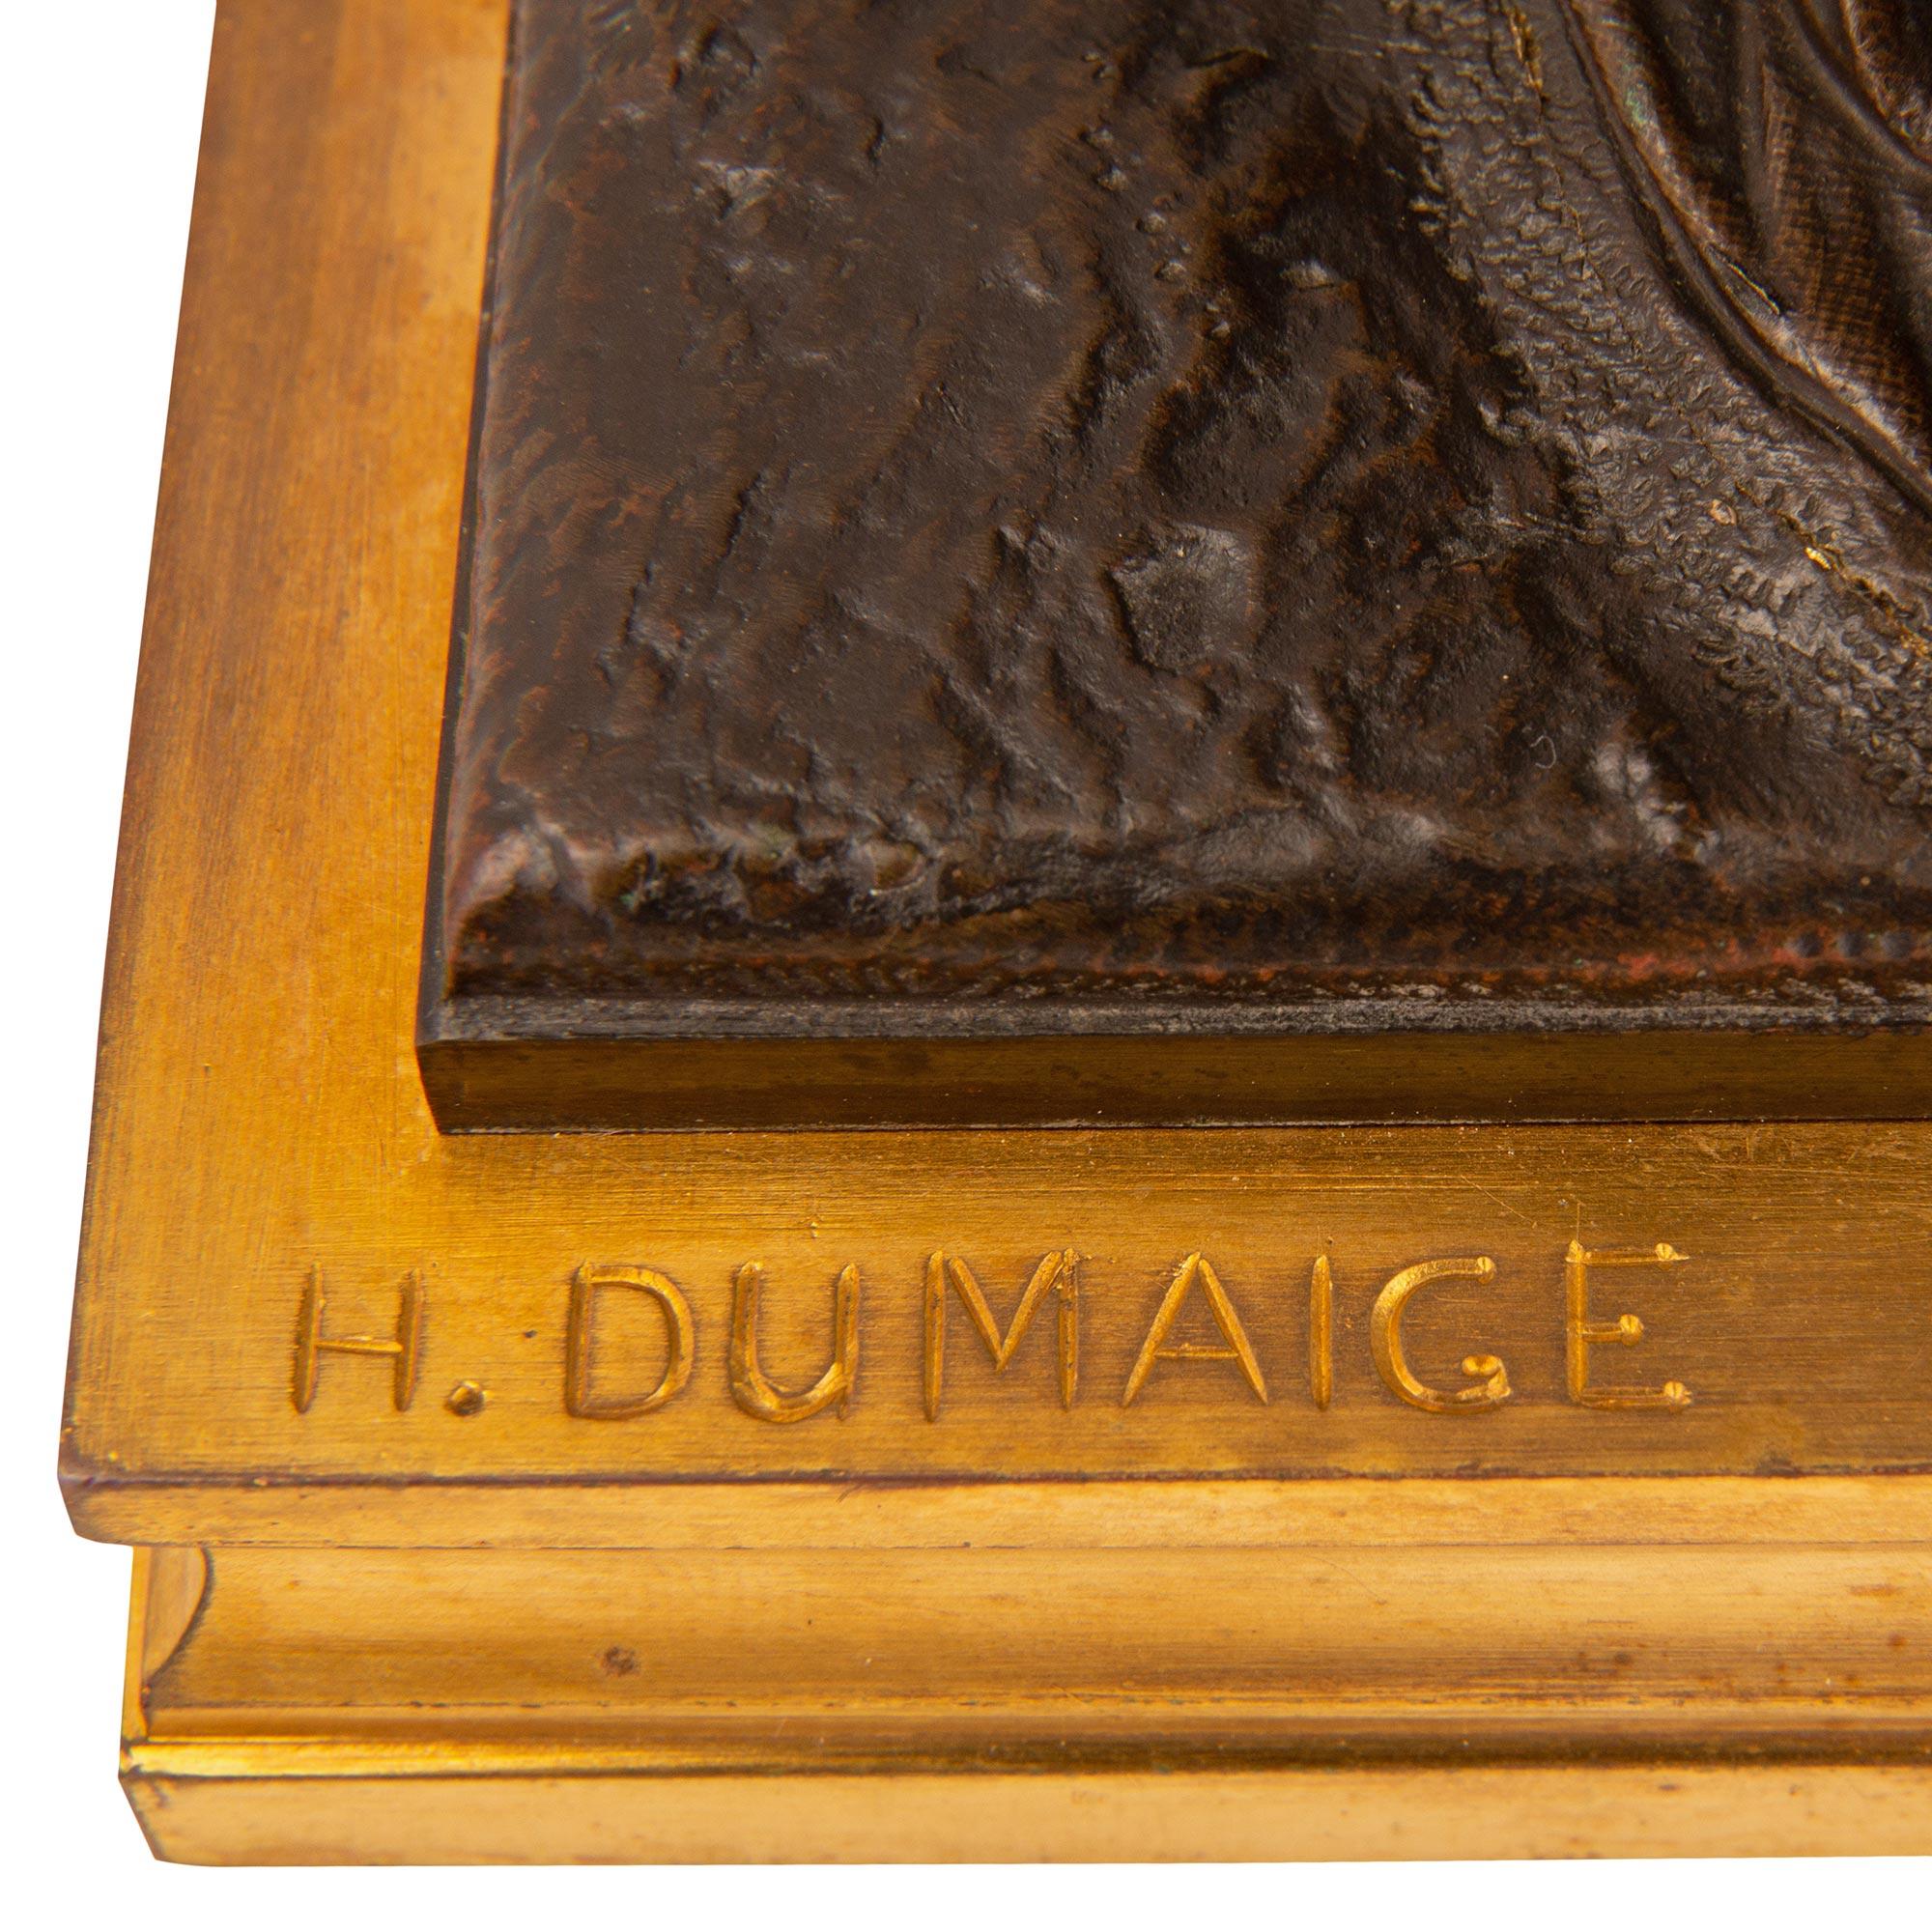 French 19th Century Bronze Statue, Signed H. Dumaige For Sale 4